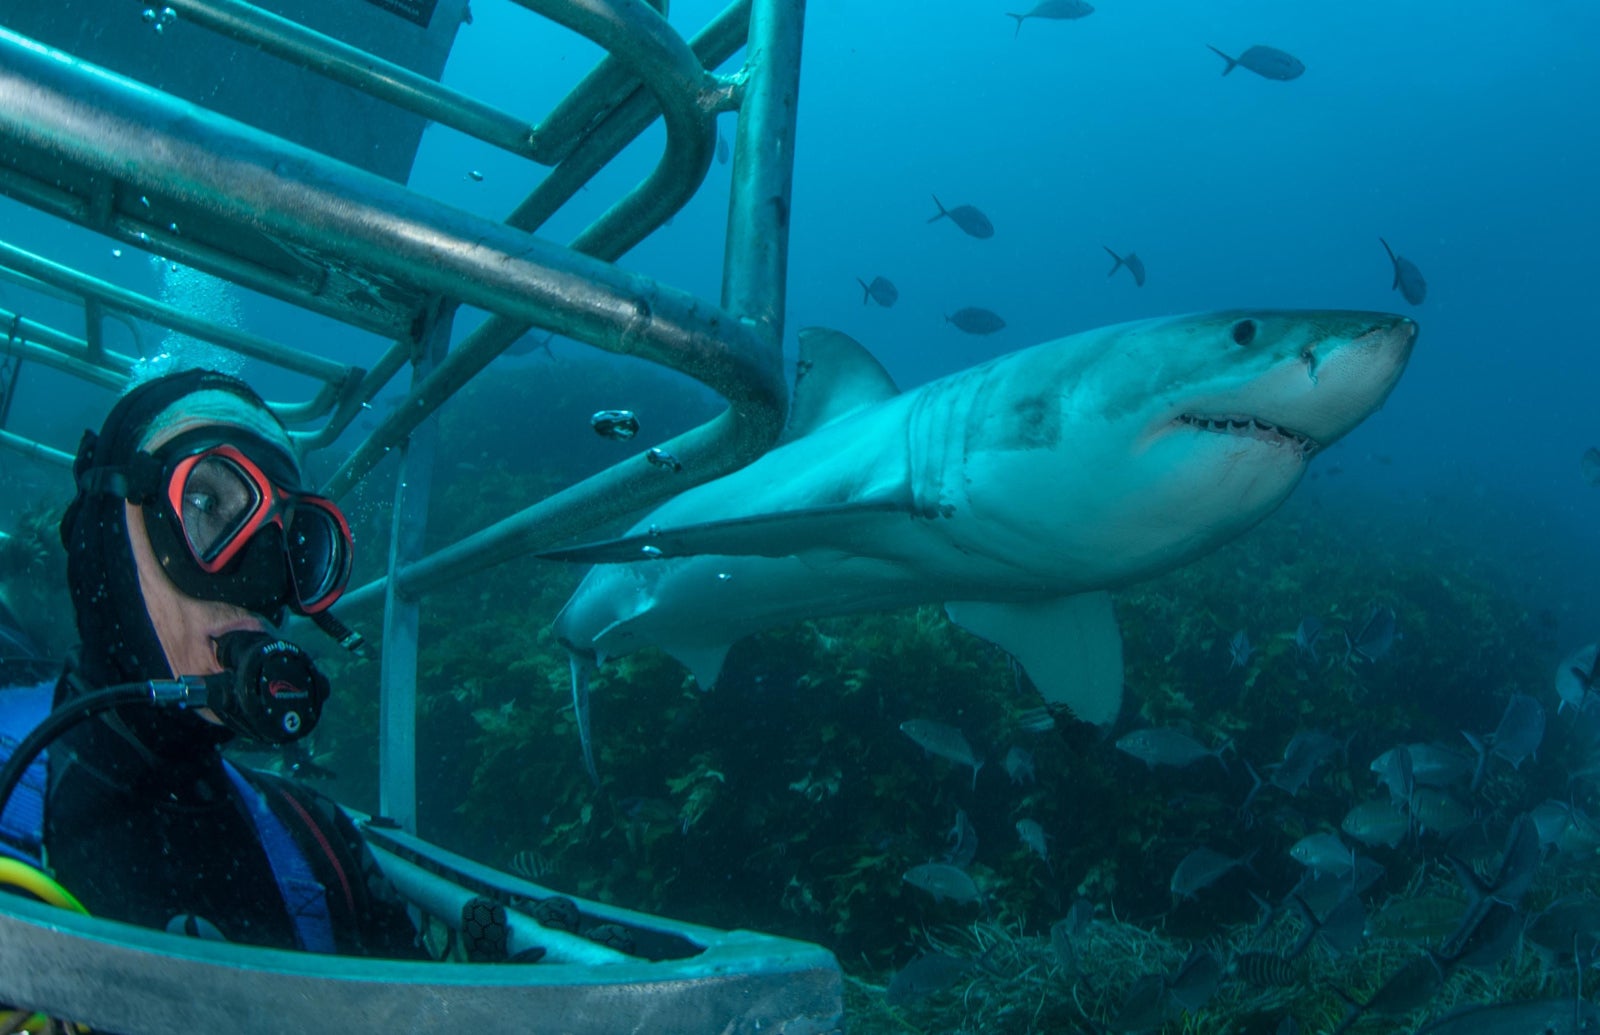 Australia’s most wanted: the much misunderstood great white shark